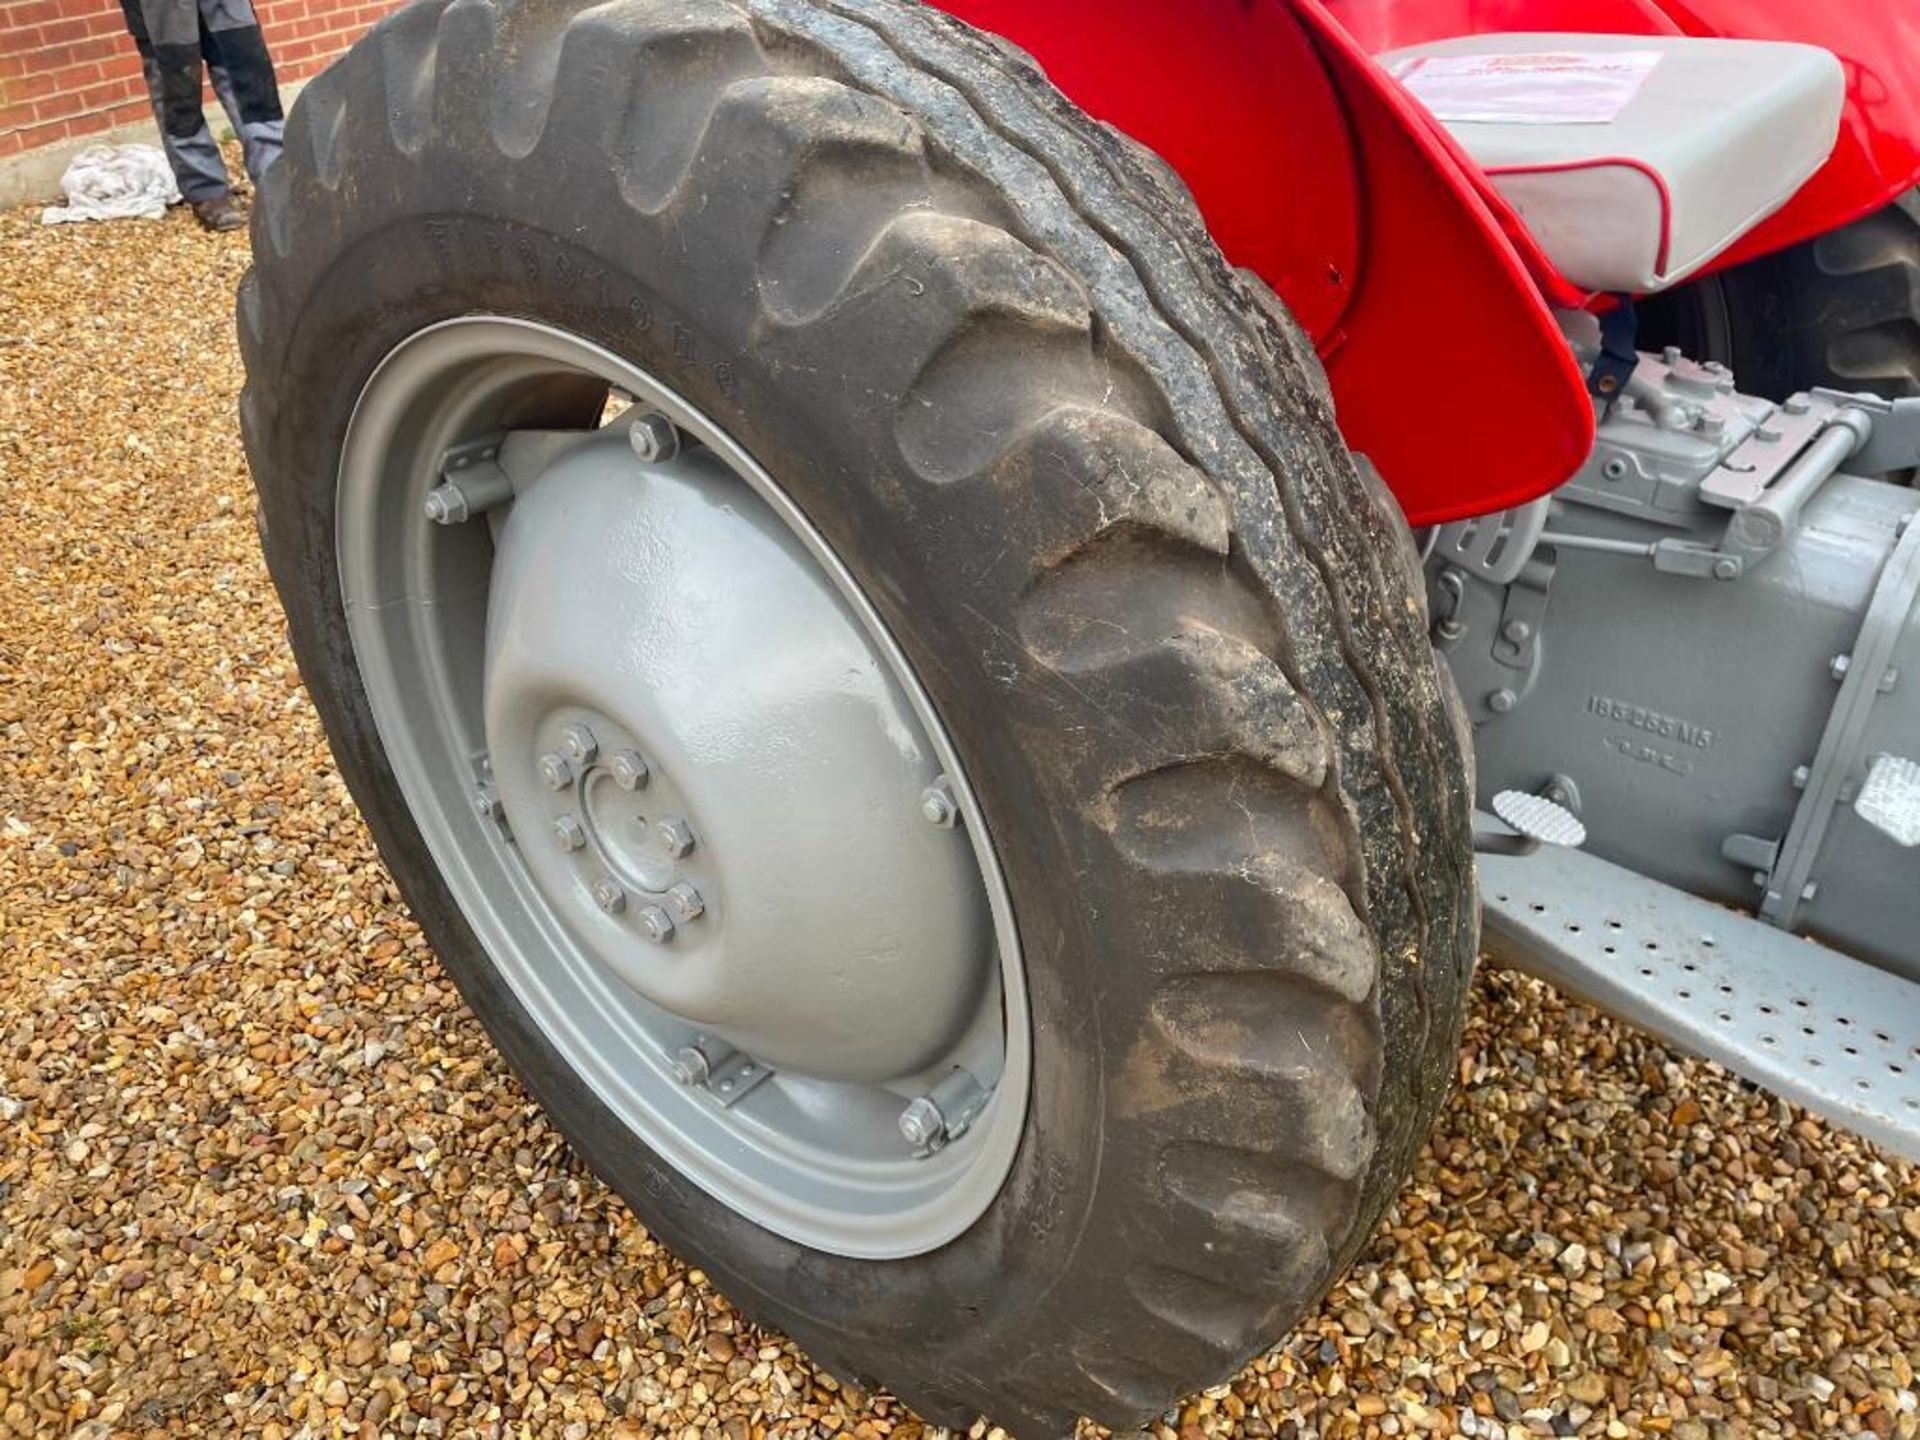 1962 Massey Ferguson 35 Industrial petrol 2wd tractor on 6.00-16 front and 10.00-28IND rear wheels a - Image 17 of 19